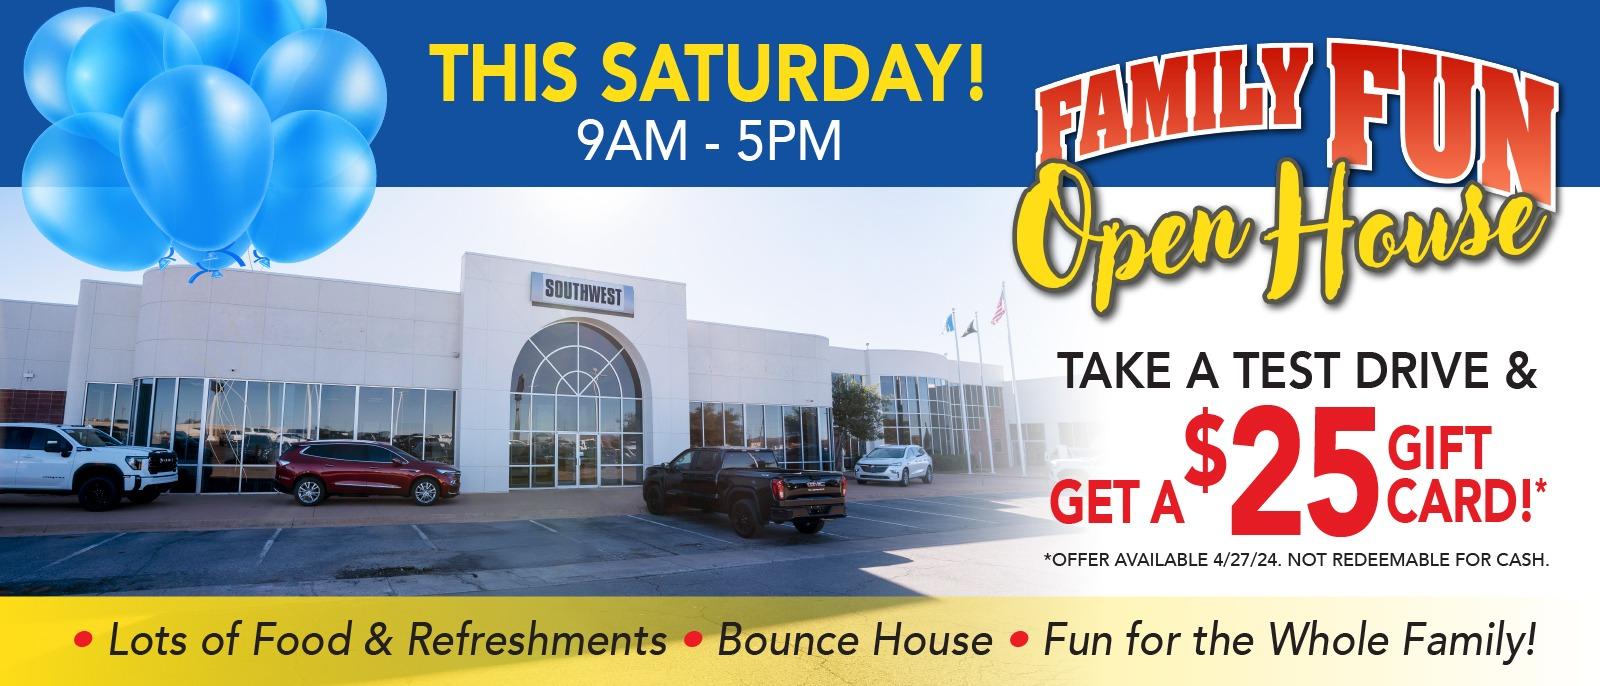 Family Fun Open House at SouthWest Buick GMC in Lawton!🥳